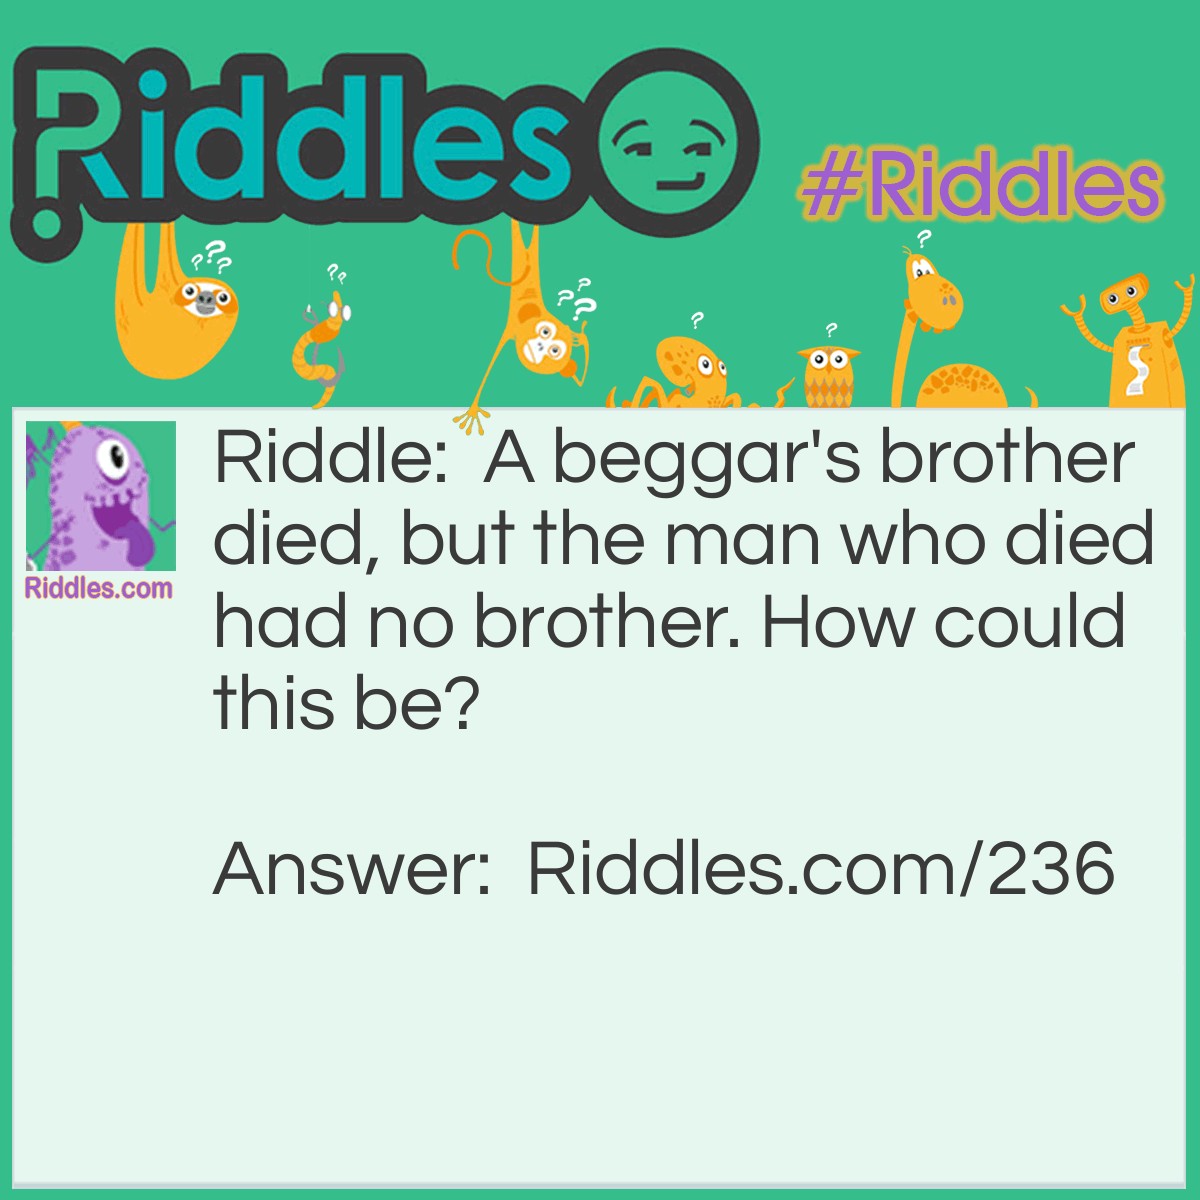 Riddle: A beggar's brother died, but the man who died had no brother. How could this be? Answer: The beggar was a woman.